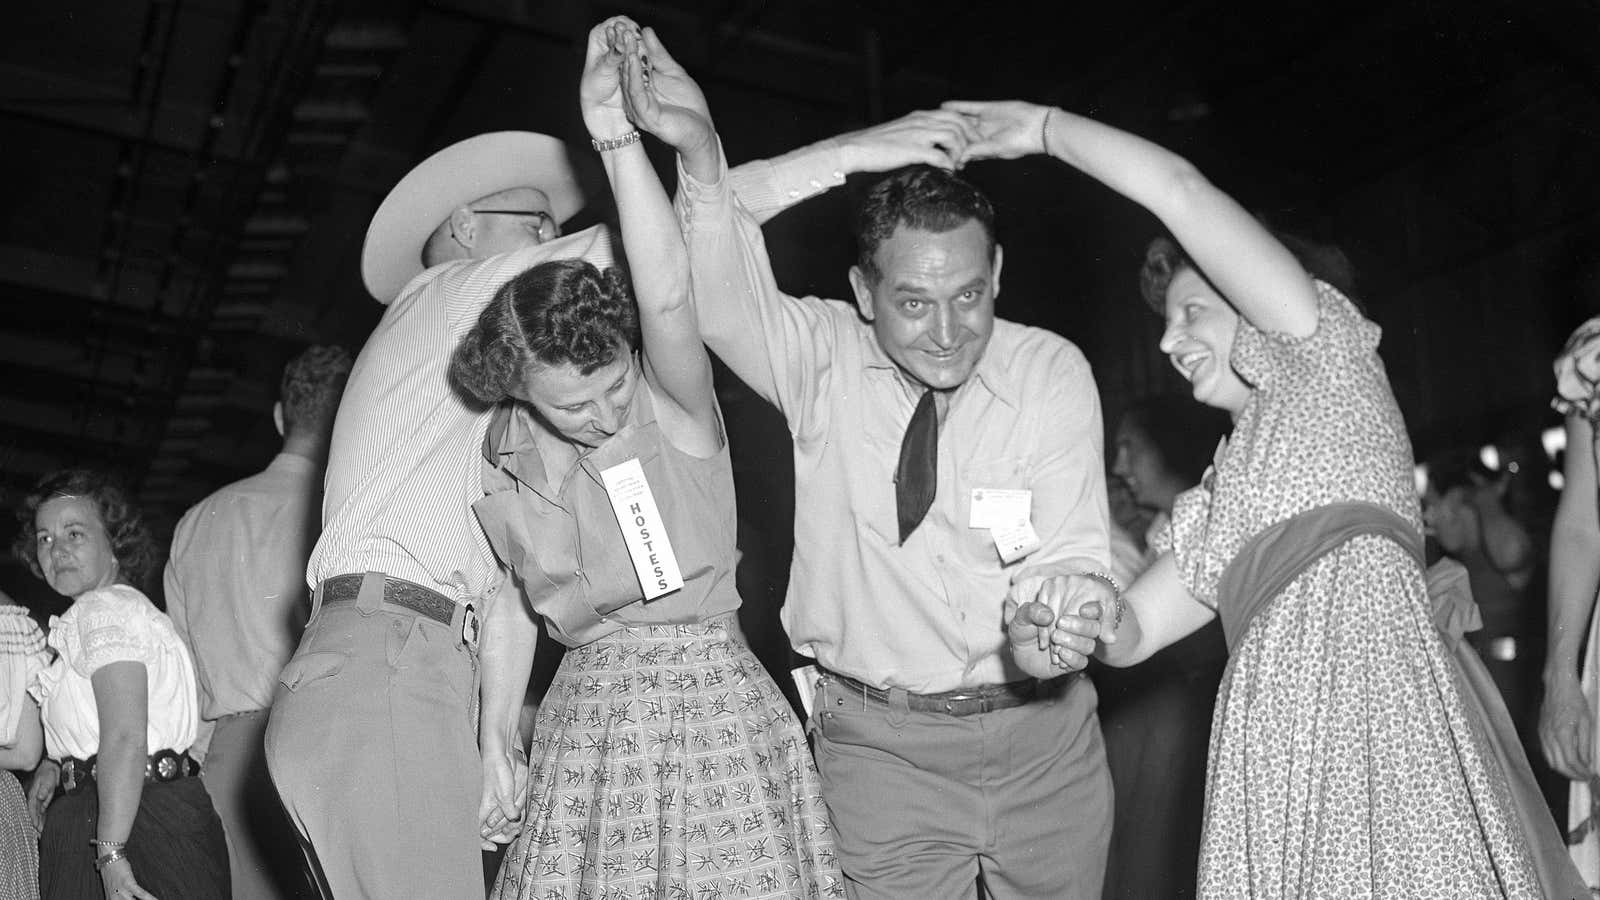 Americas wholesome square dancing tradition is a tool of white supremacy